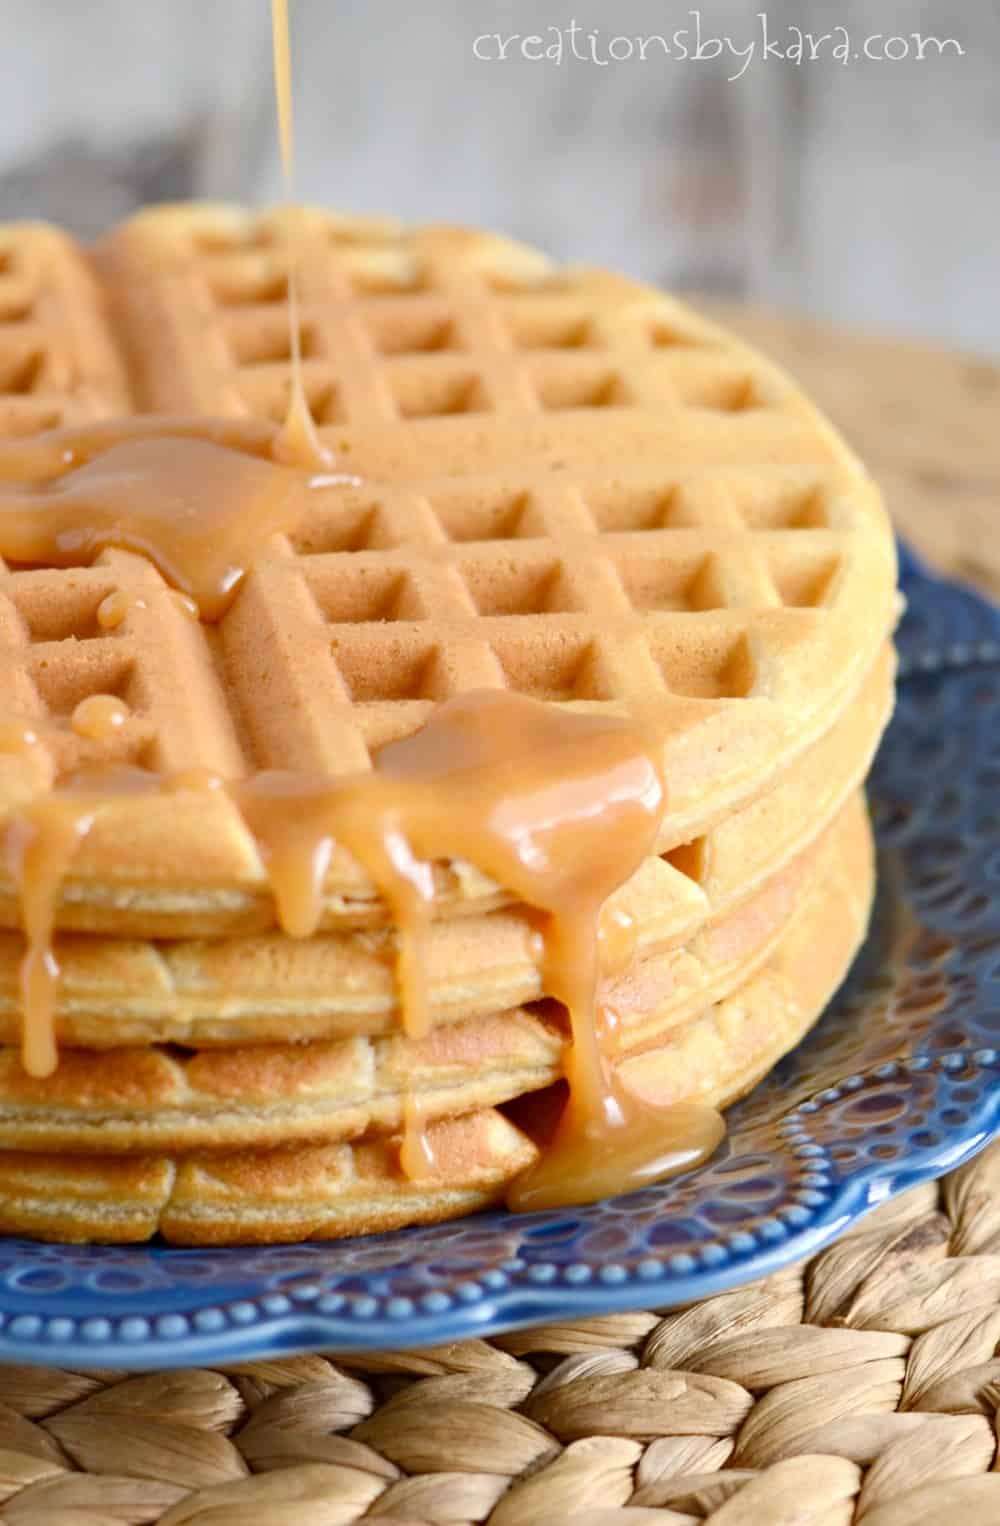 Peanut Butter Waffles with Peanut Butter Syrup - Creations by Kara